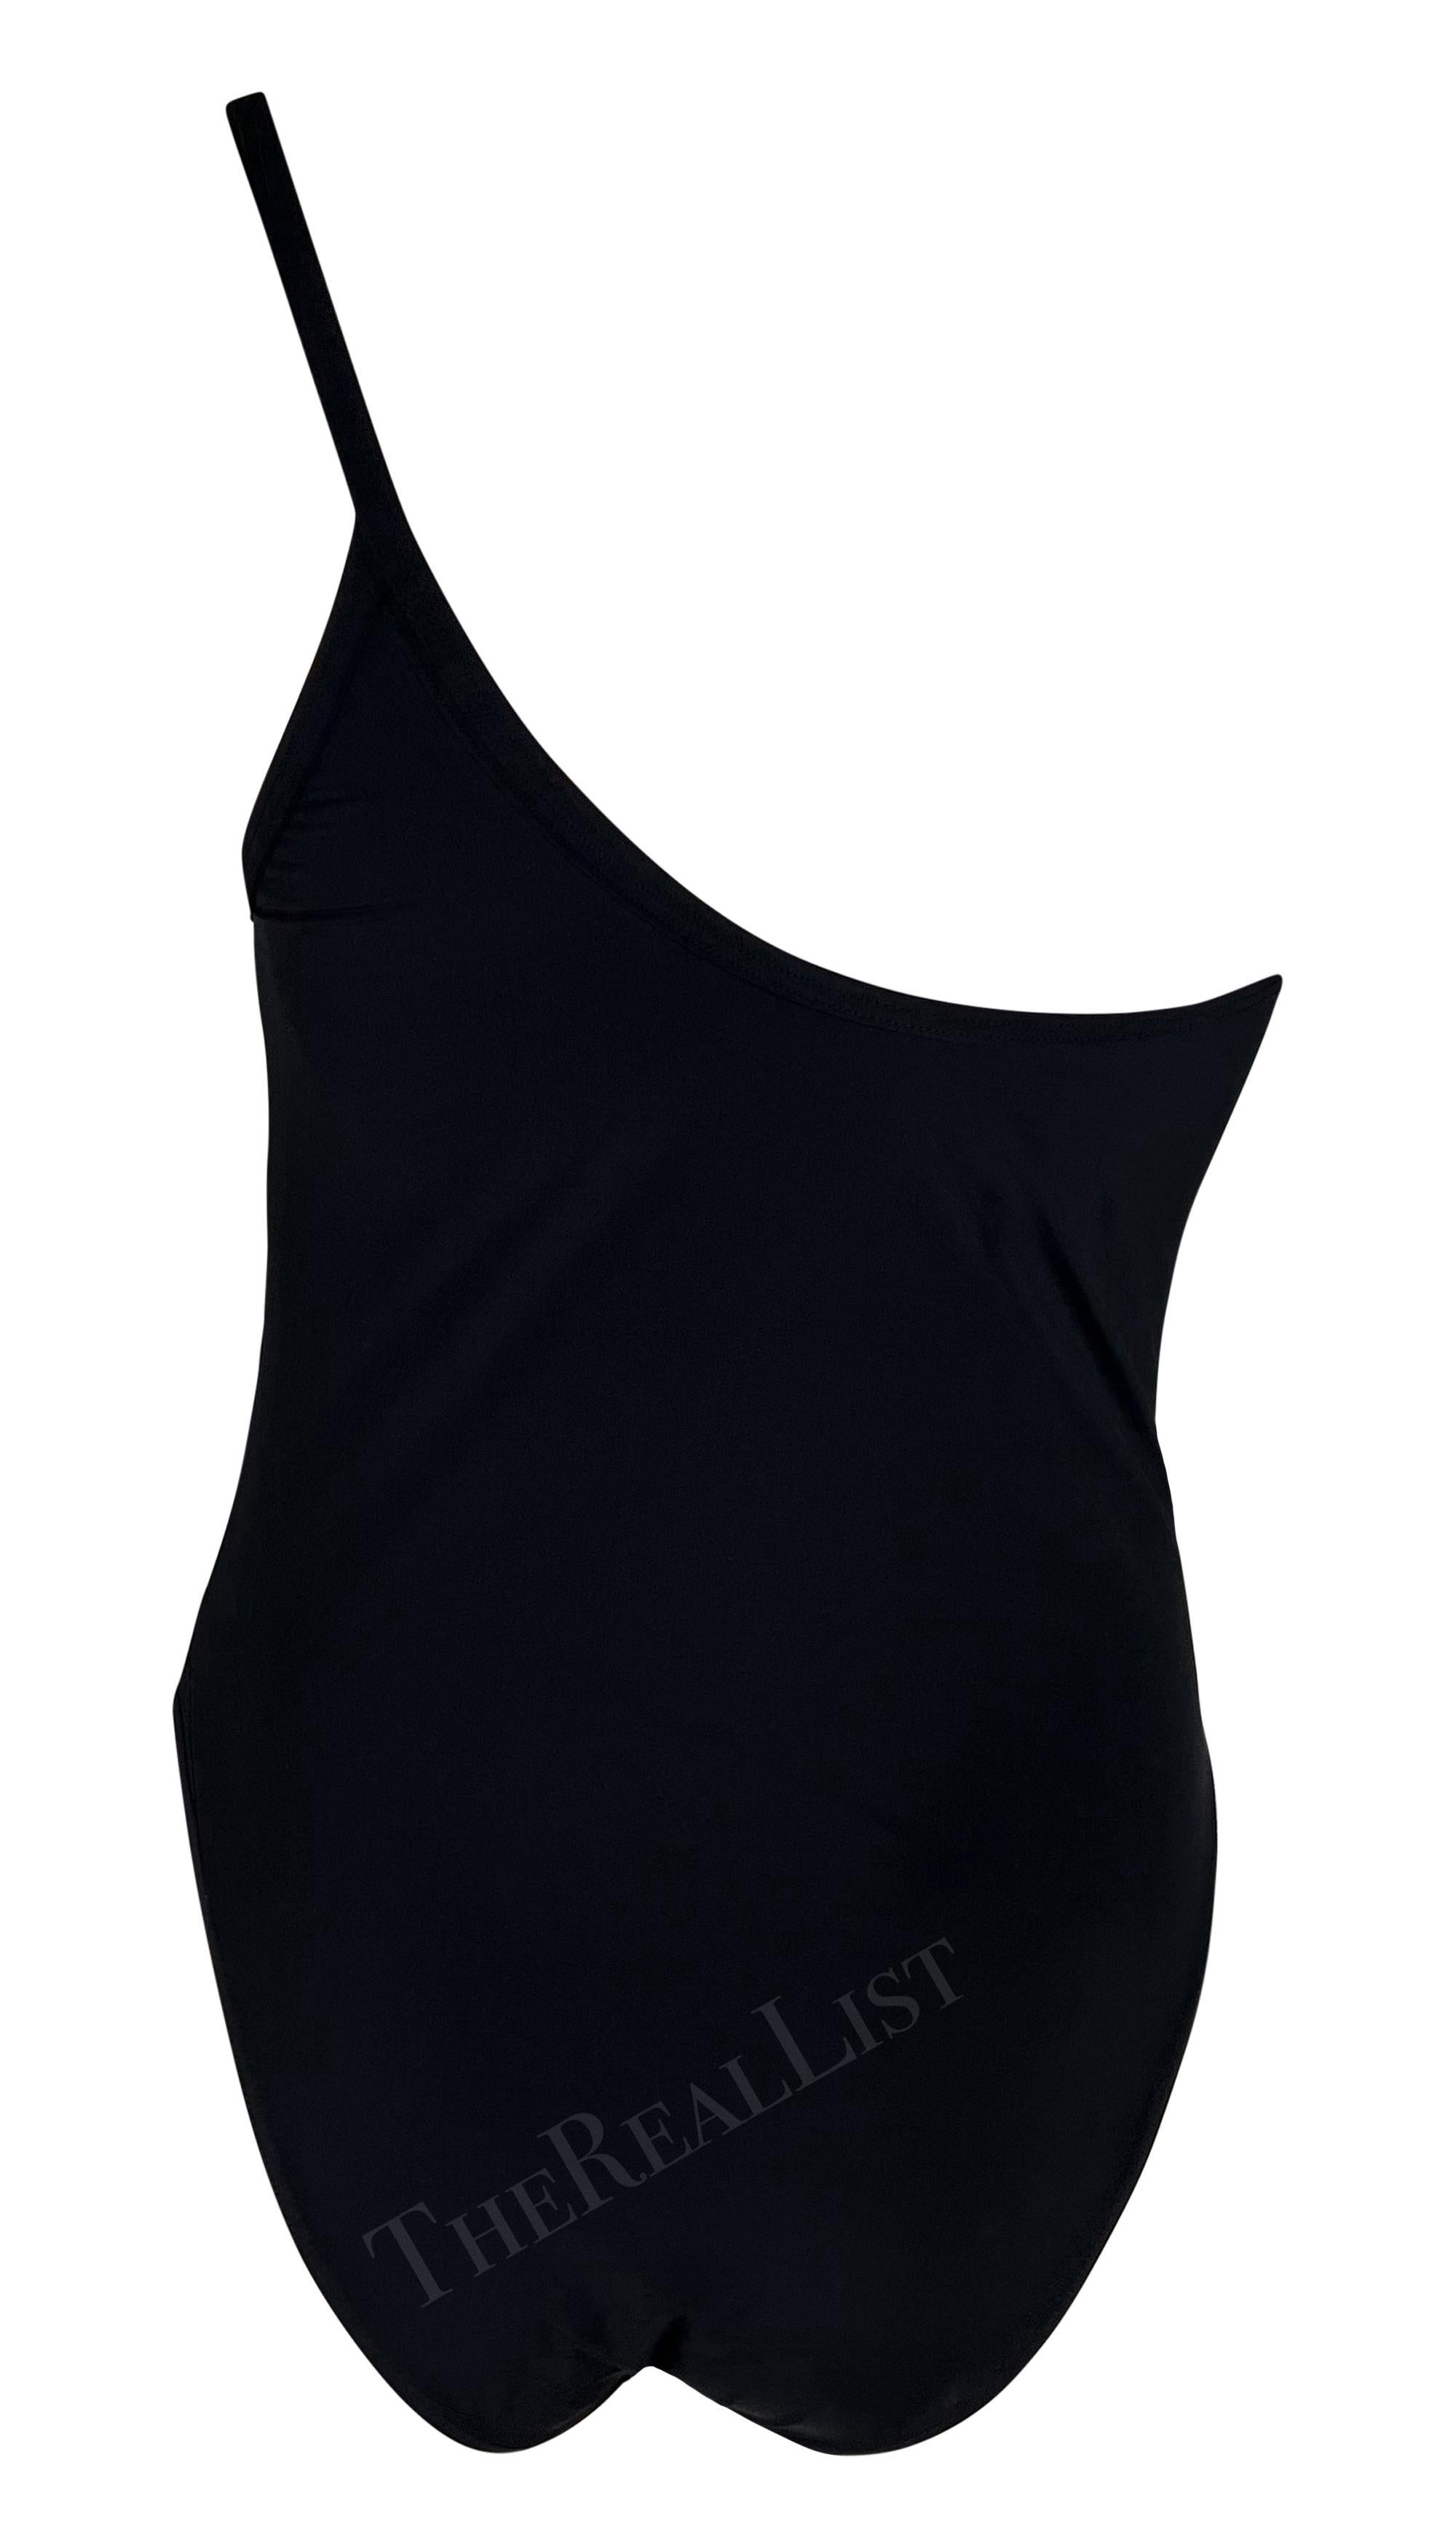 Women's S/S 1998 Gucci by Tom Ford Black 'G' Buckle Logo One Piece Swimsuit Bodysuit For Sale